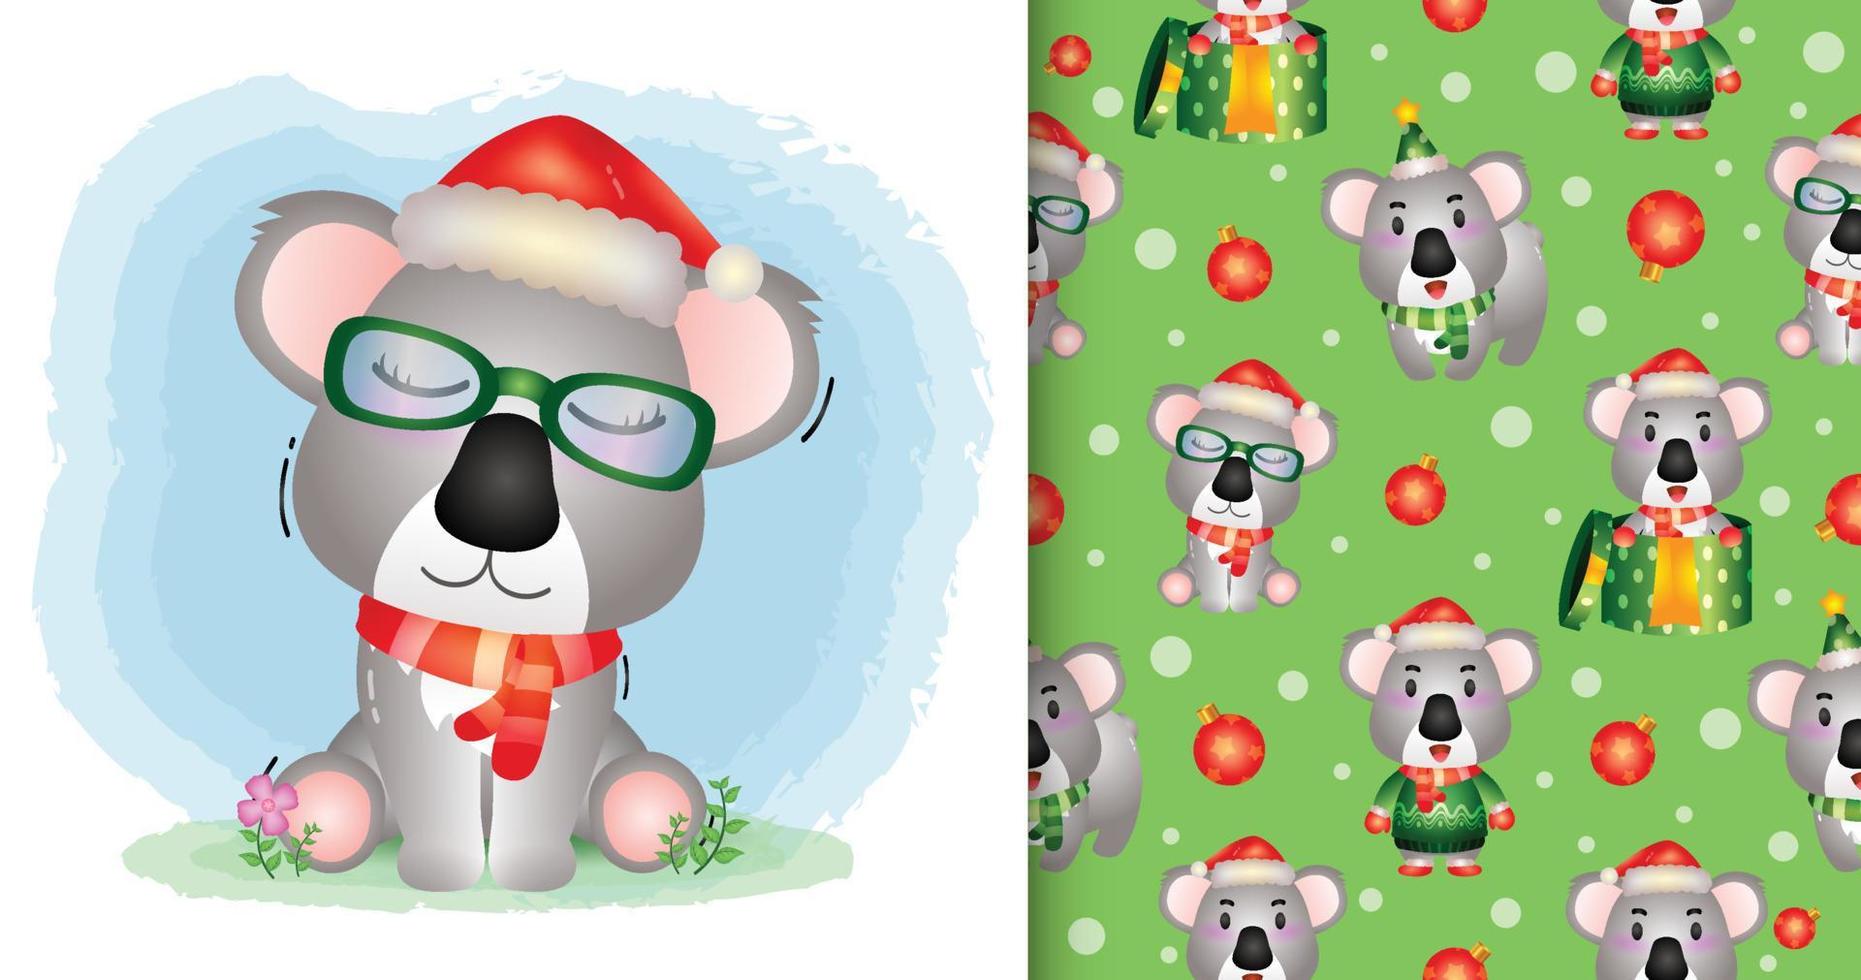 a cute koala christmas characters with santa hat and scarf. seamless pattern and illustration designs vector